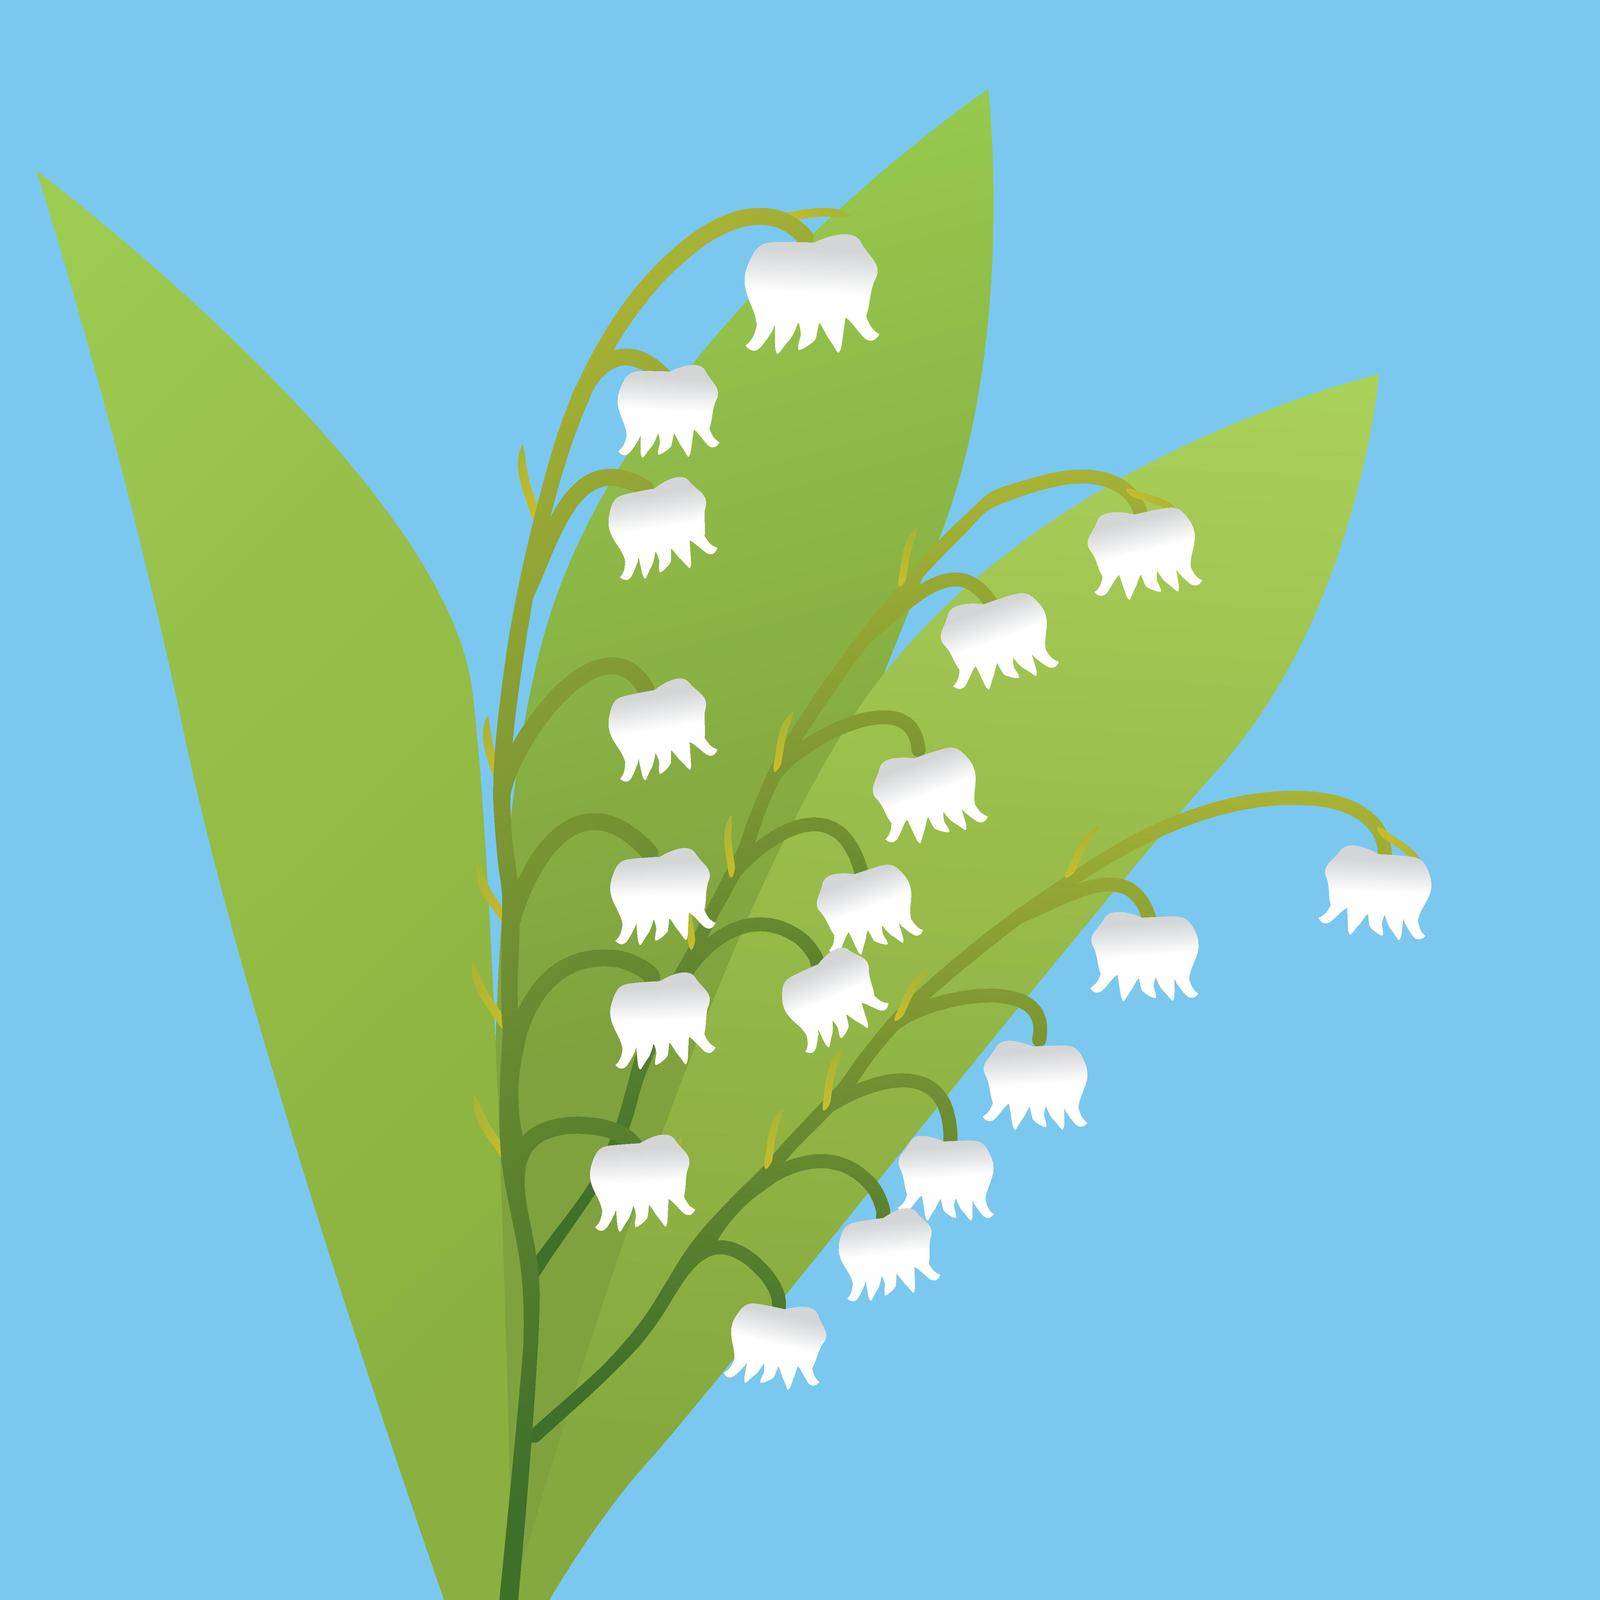 Lily of the valley by Bwise